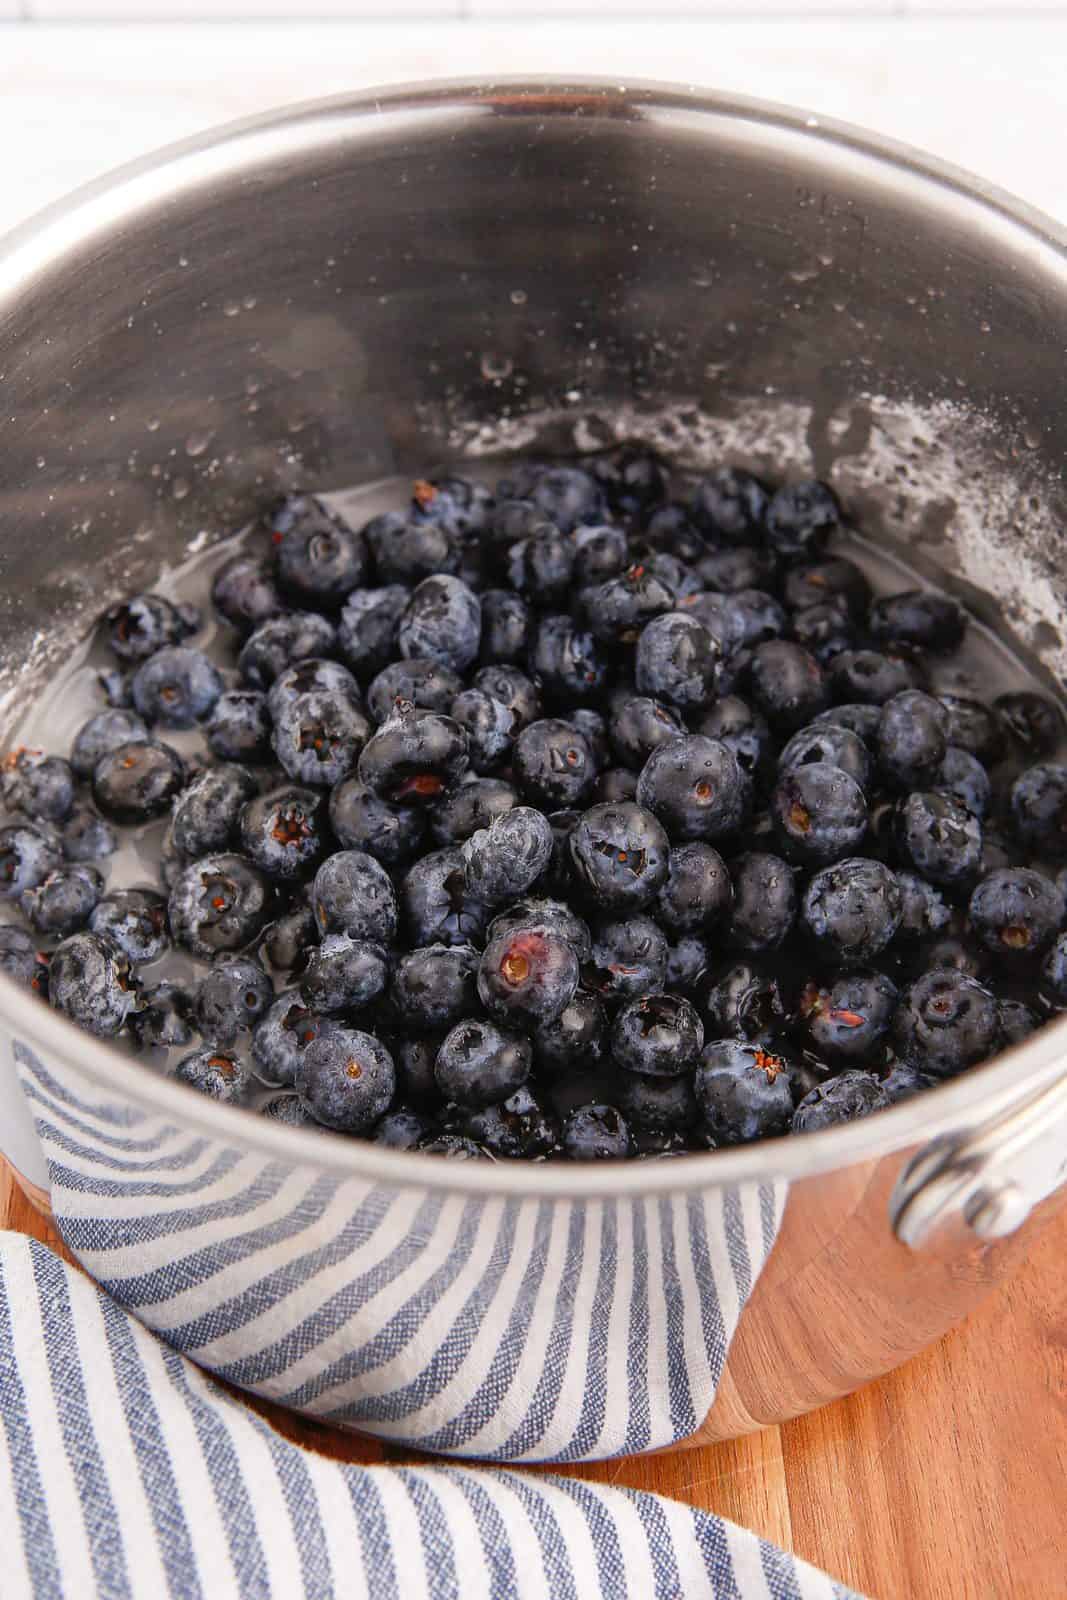 Blueberries, water, lemon juice and vanilla added to the sugar and cornstarch mixture.